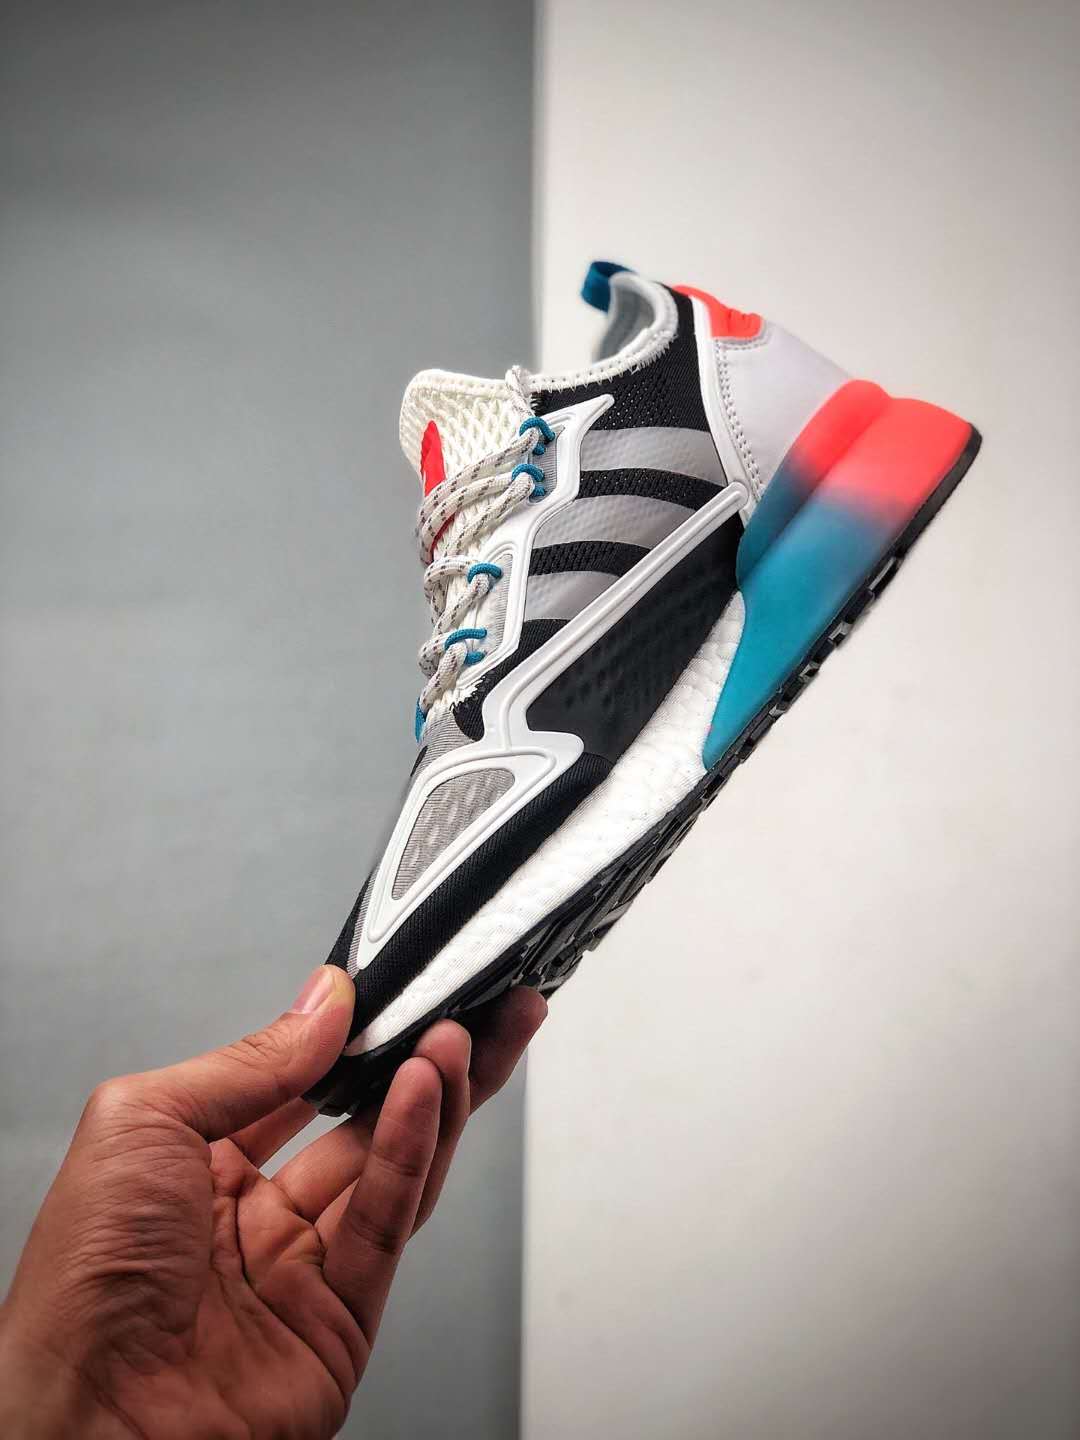 Adidas ZX 2K Boost 'White Multi' FY2012 - Shop the Latest Colorway